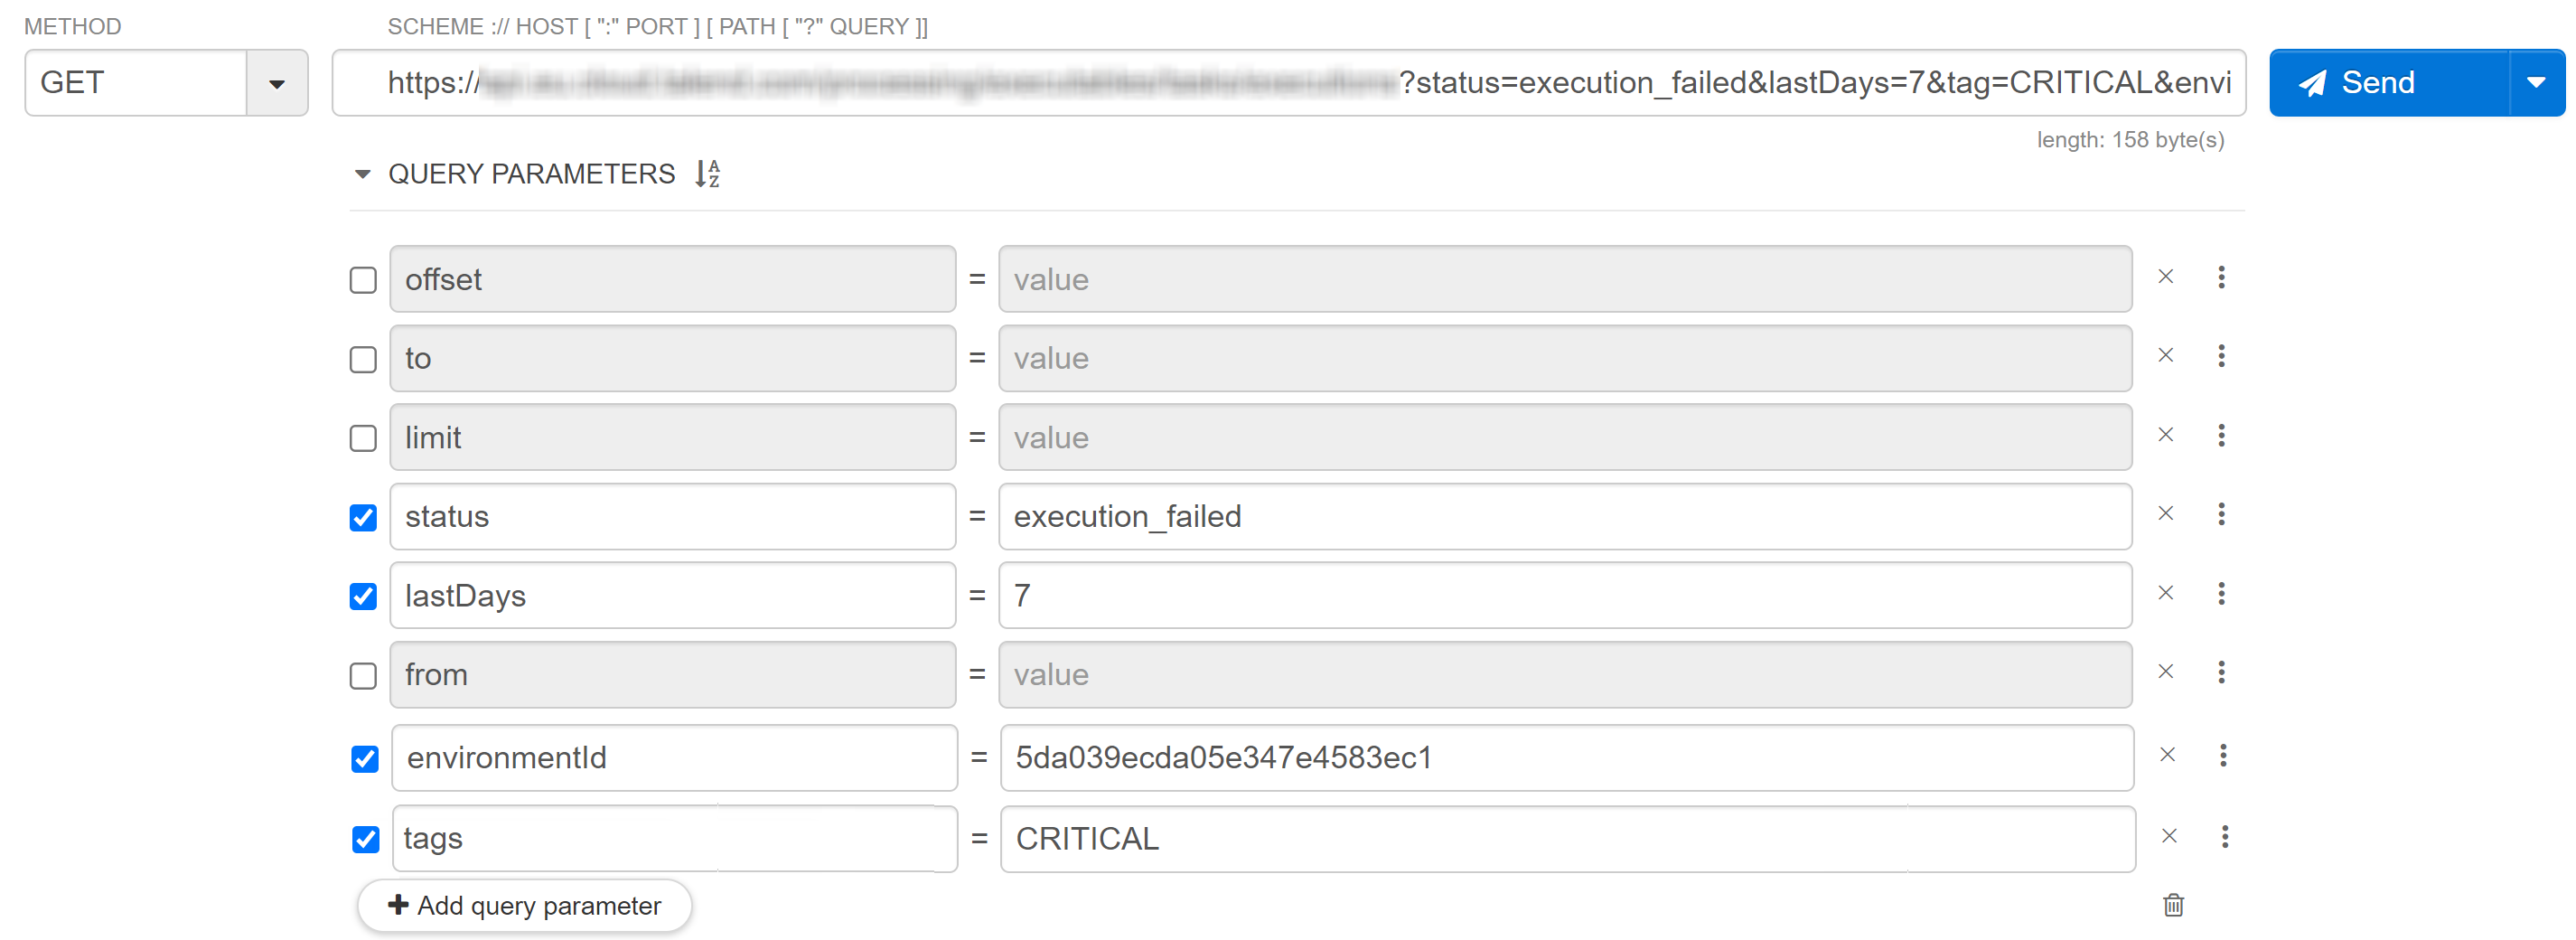 The status, lastDays, environmentId and tags parameters are selected in the query parameters of the request.